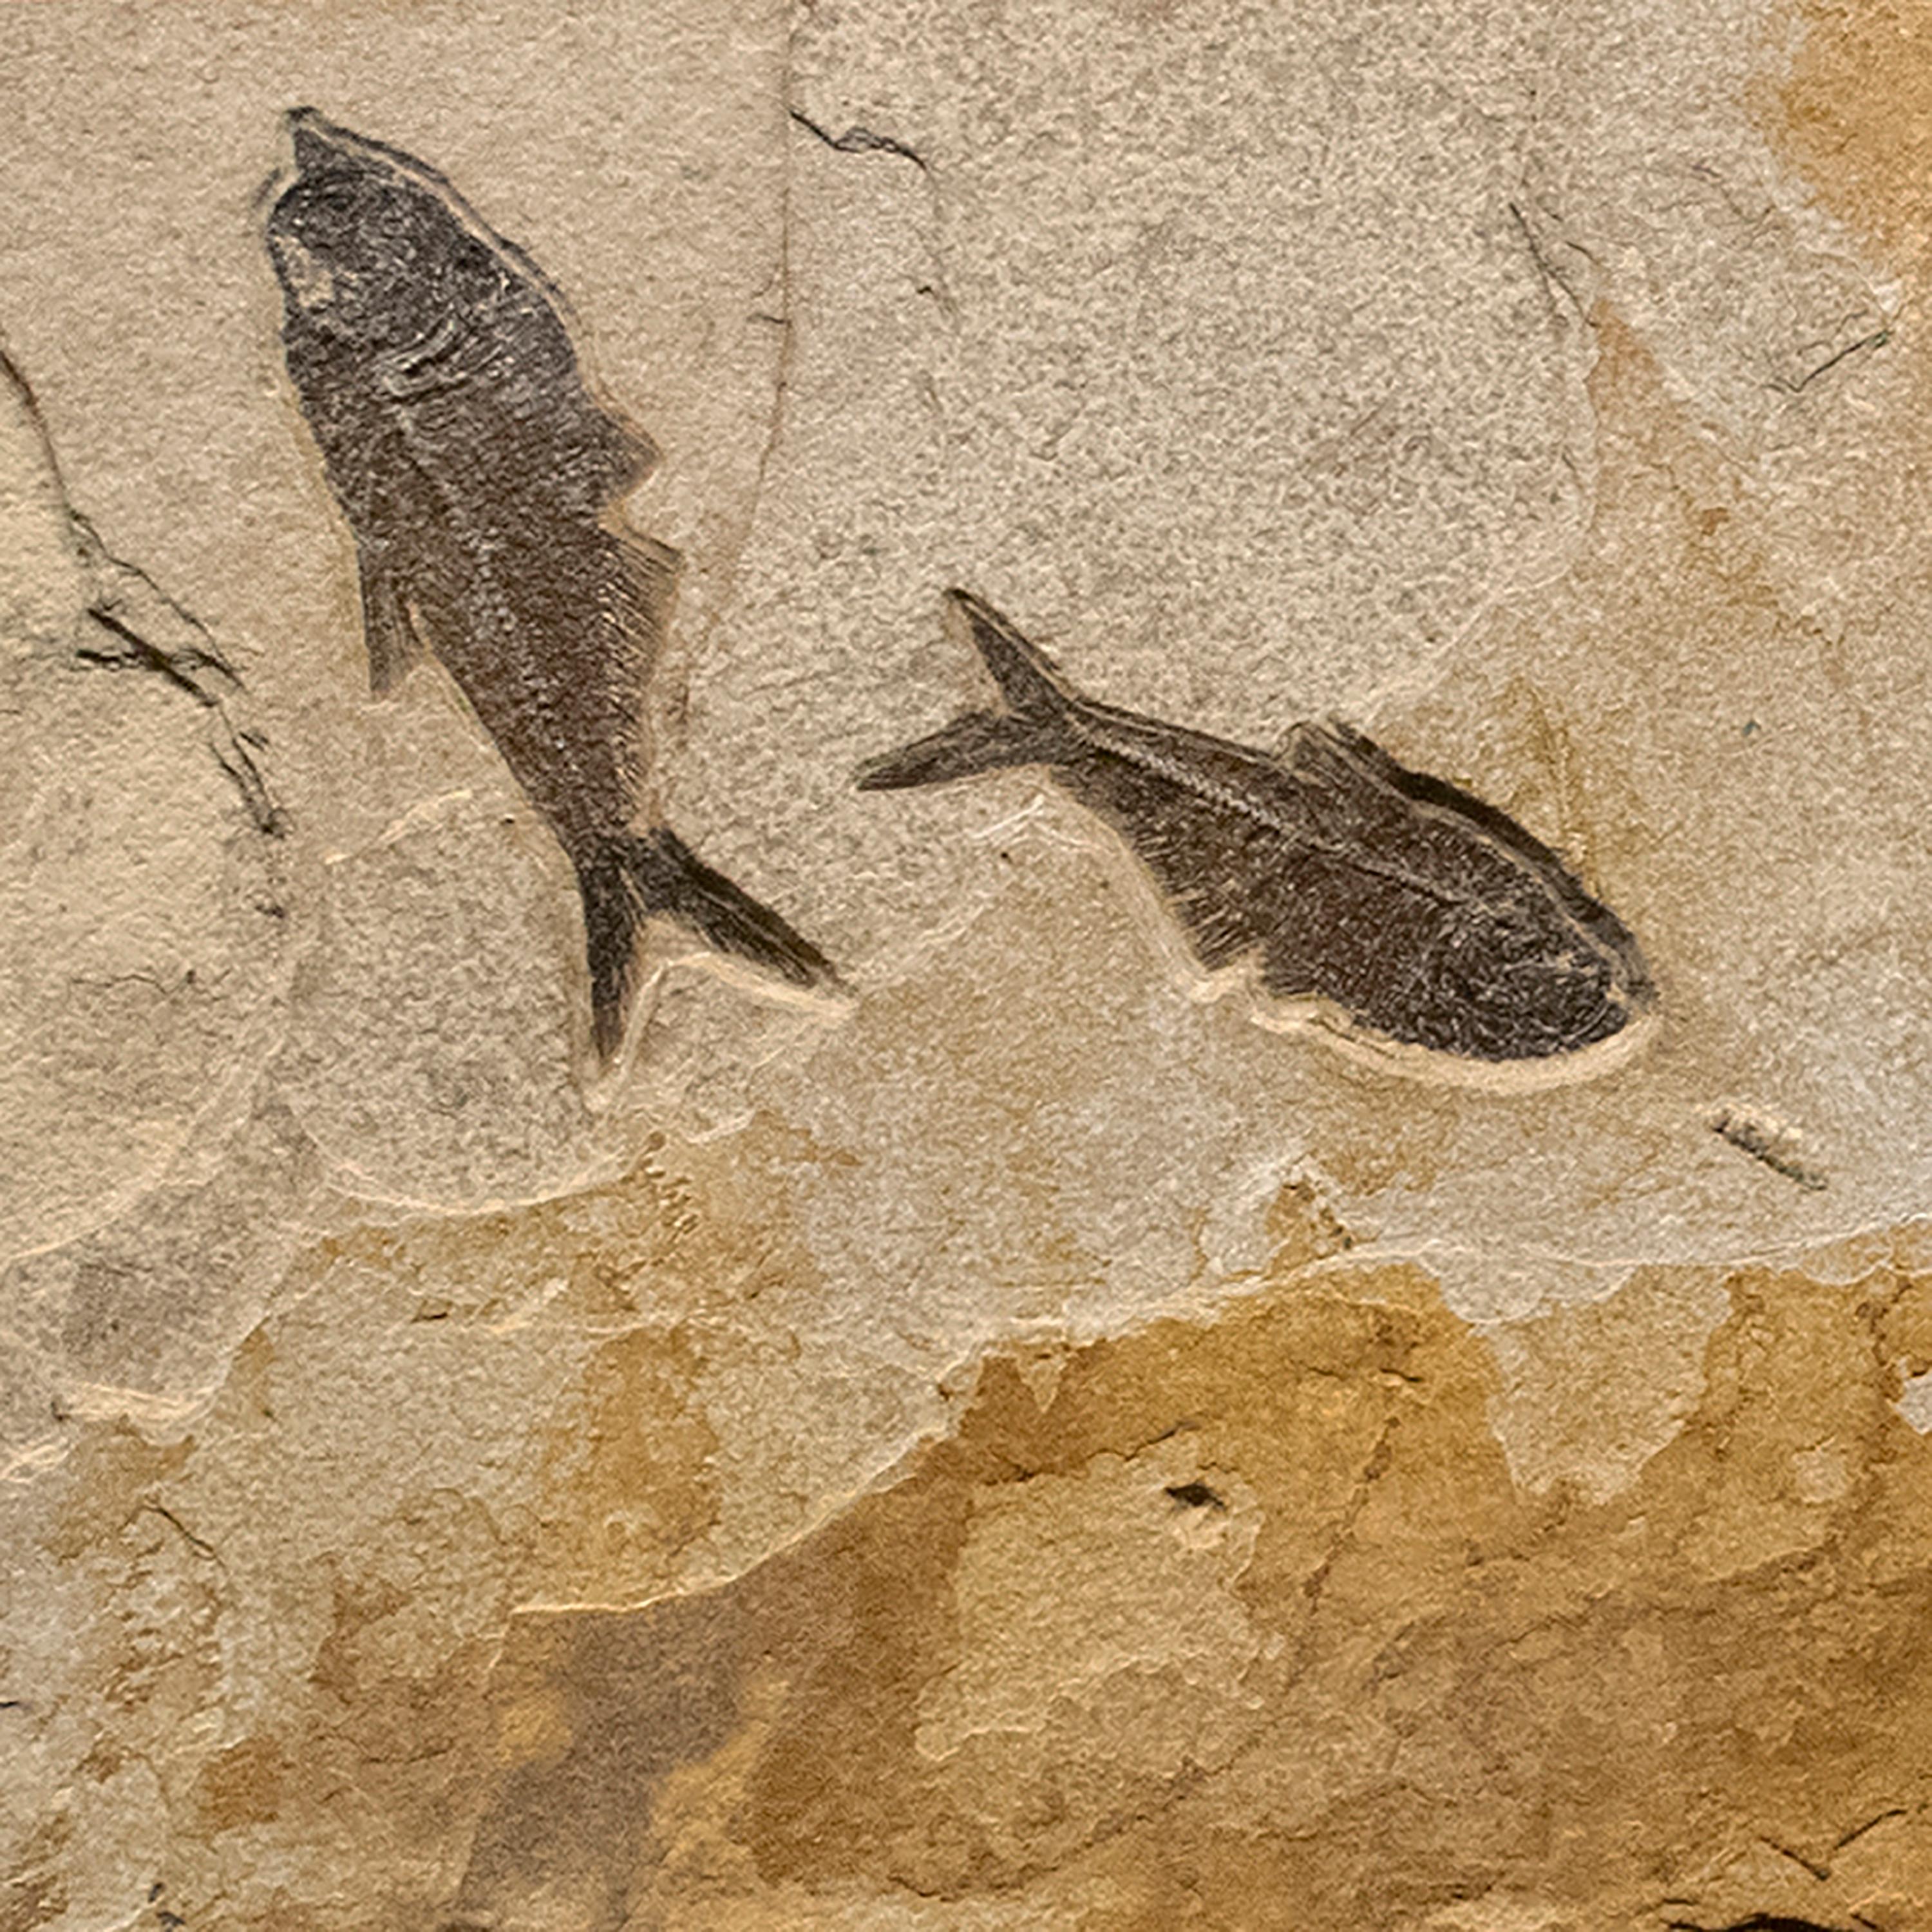 fossil mural